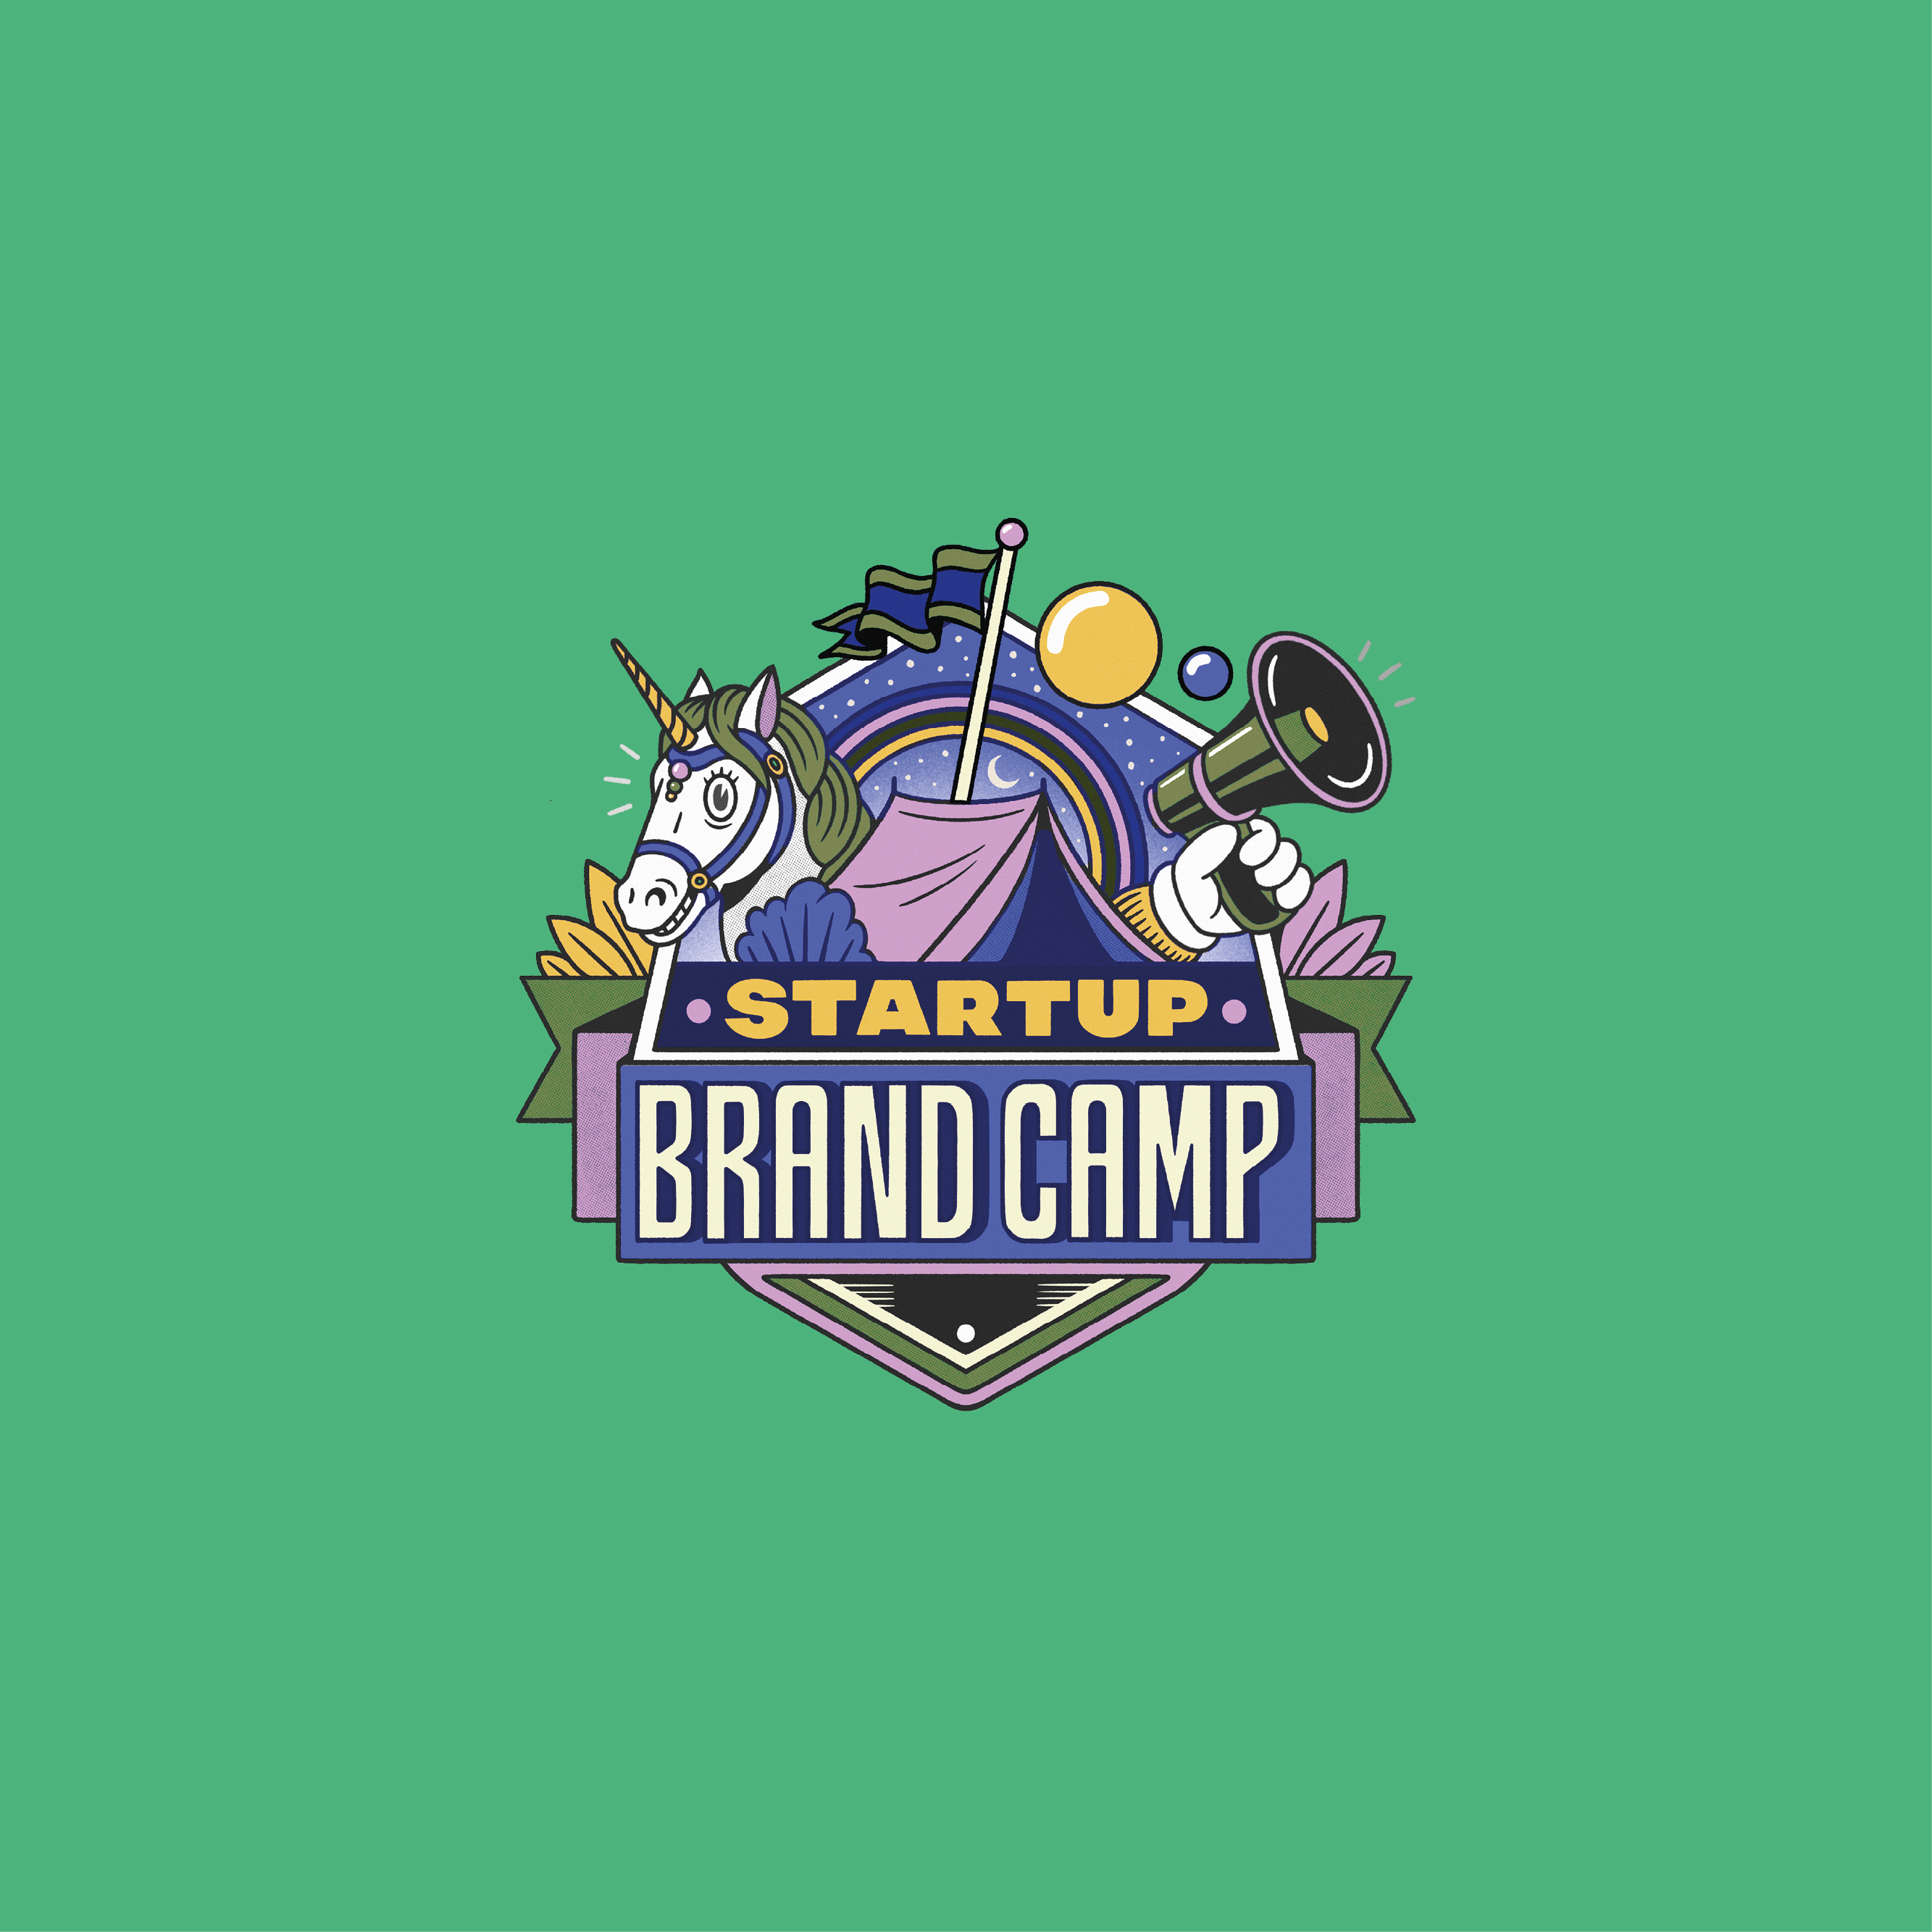 Picture of a logo on green surface for the brand called start up brand camp.